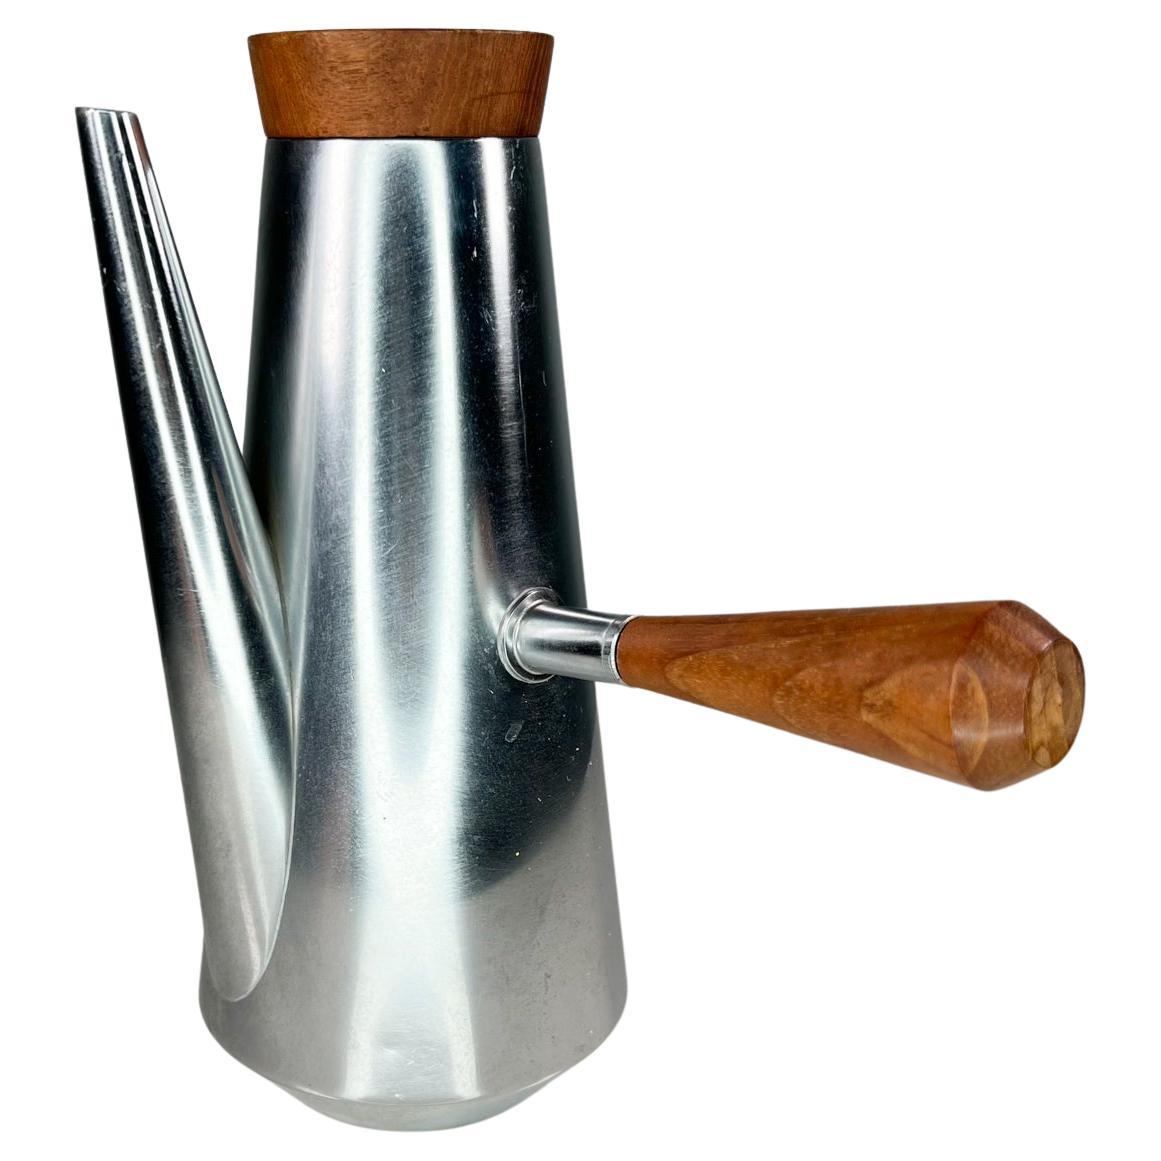 1960s Style of Kalmar Modern silver stainless steel coffee pot tea kettle with conical body, teakwood accent and brand stamp at underside. 
Maker stamped underneath: Made in Italy.
Measures: 9 tall x 8 wide x 5 depth.
Original vintage condition.